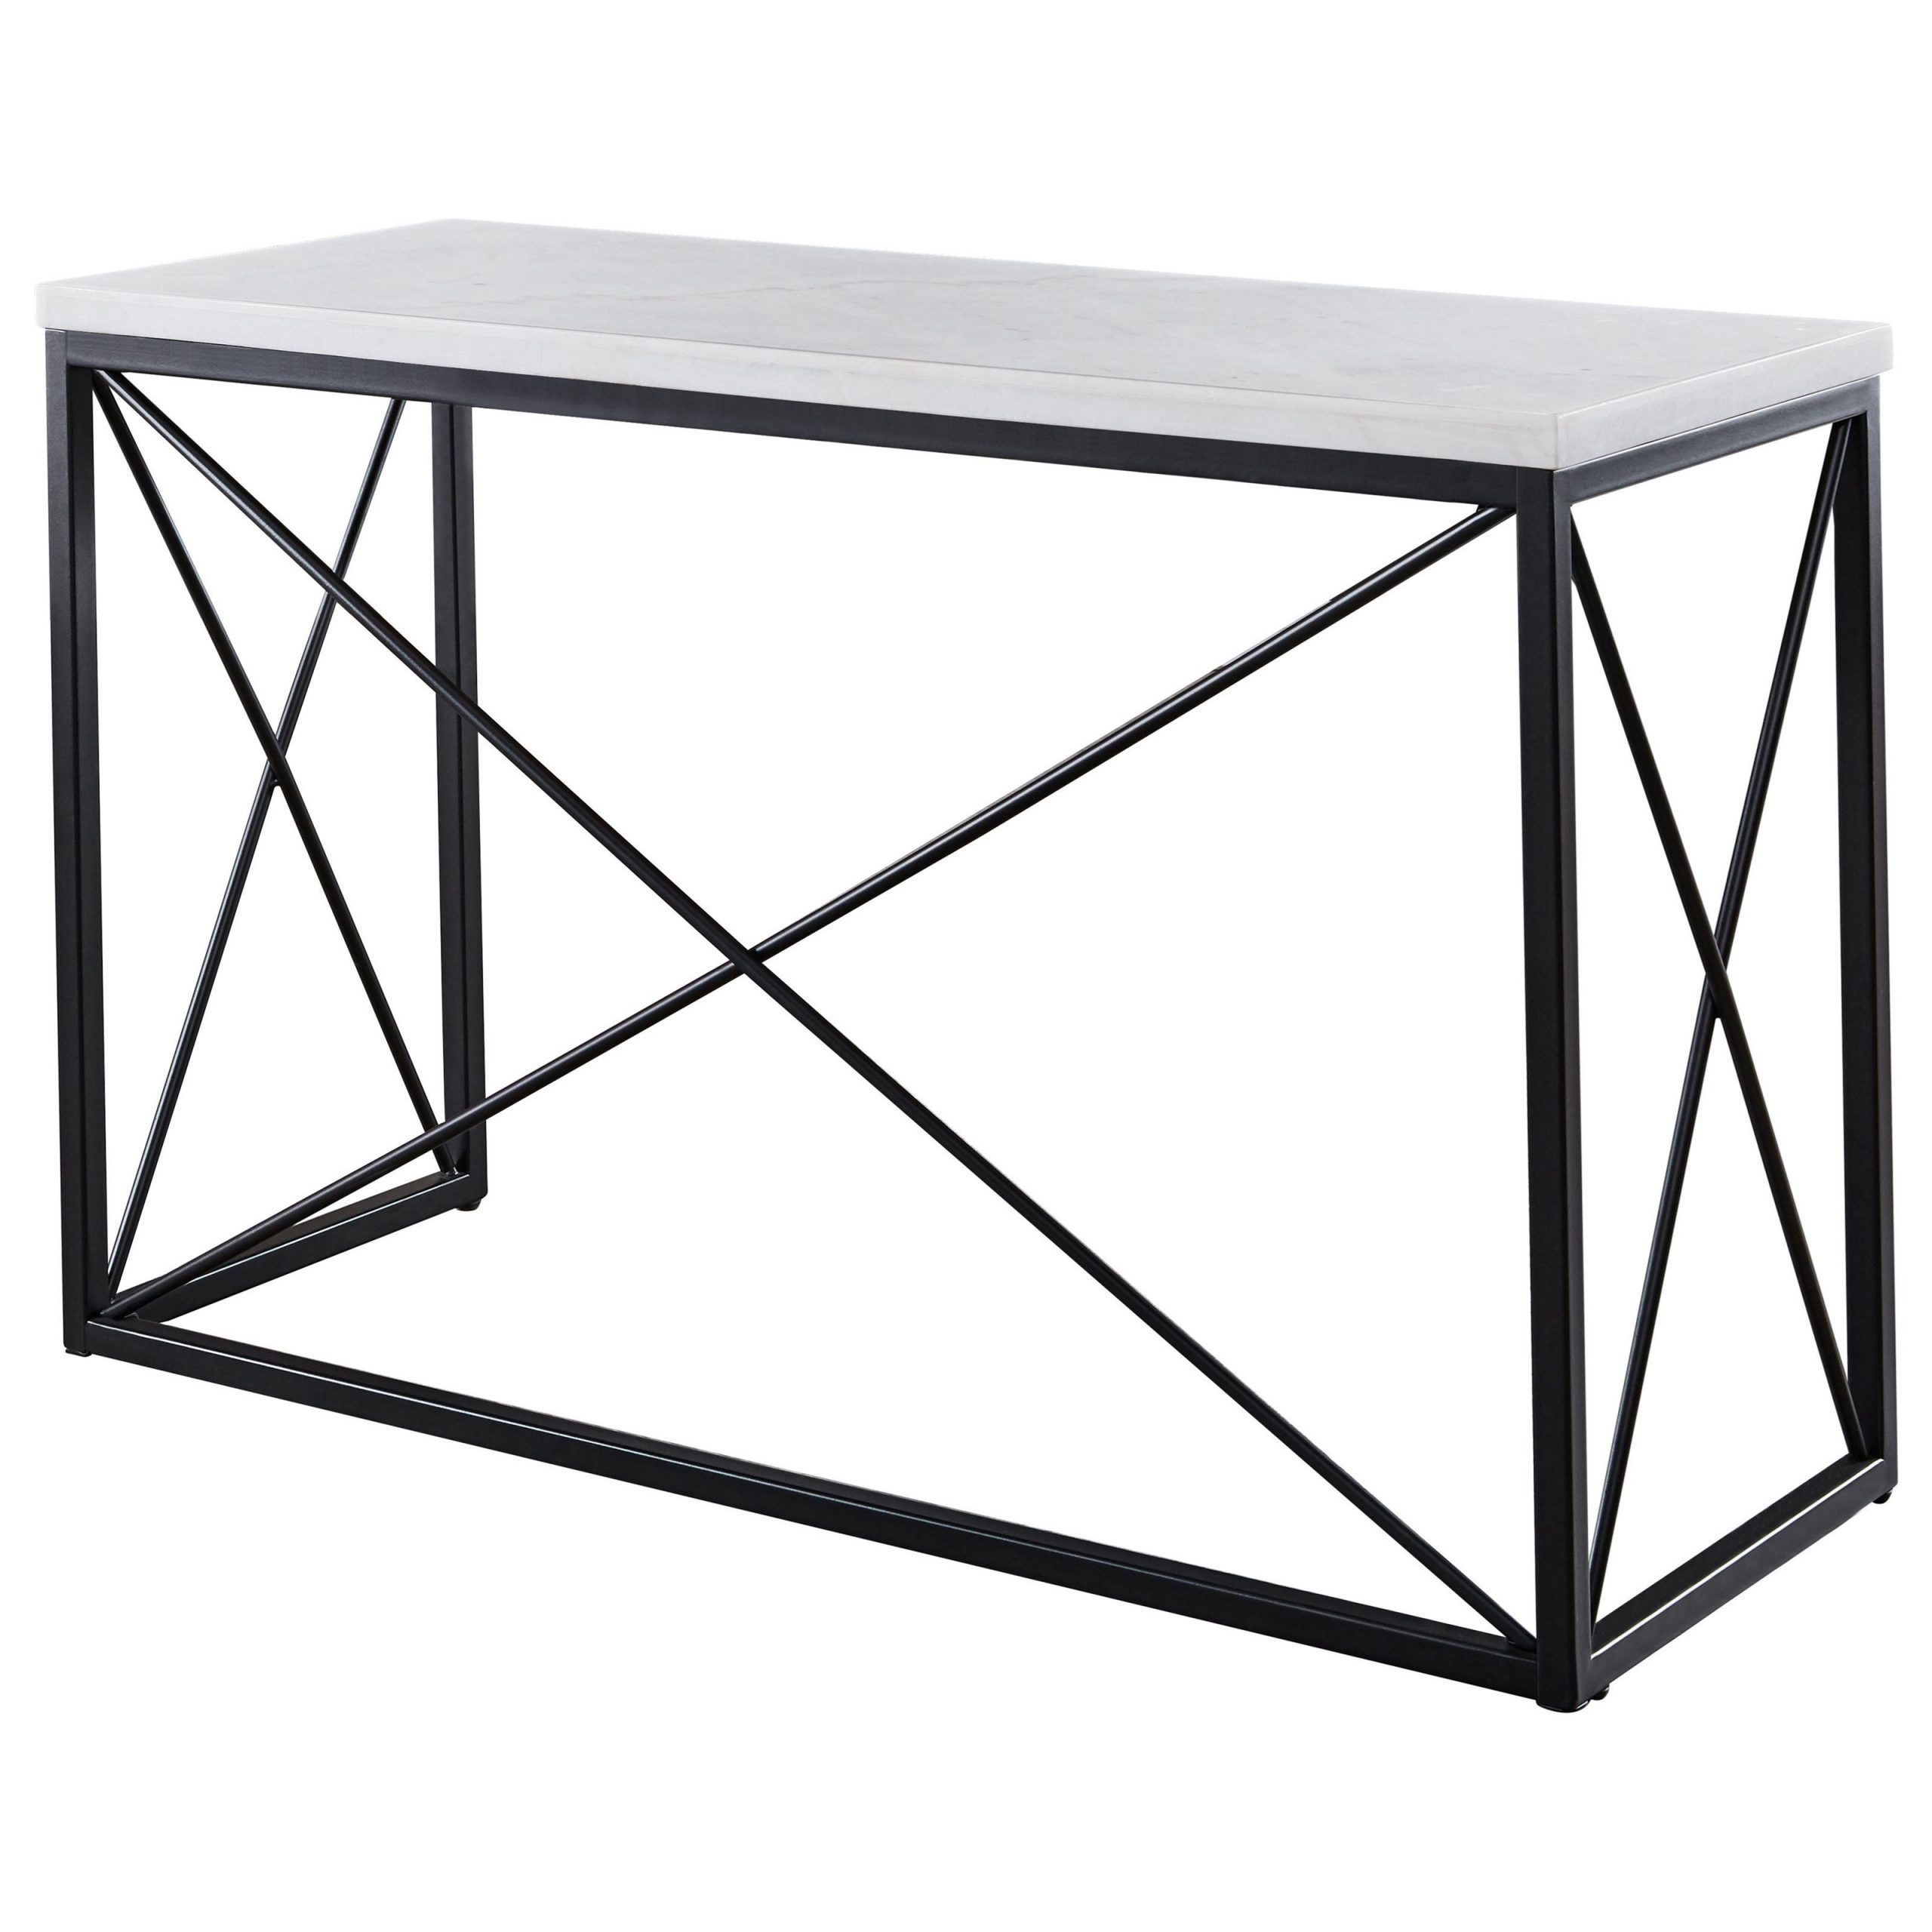 Steve Silver Skyler 1345002 Contemporary White Marble Top Pertaining To 1 Shelf Square Console Tables (Photo 3 of 20)